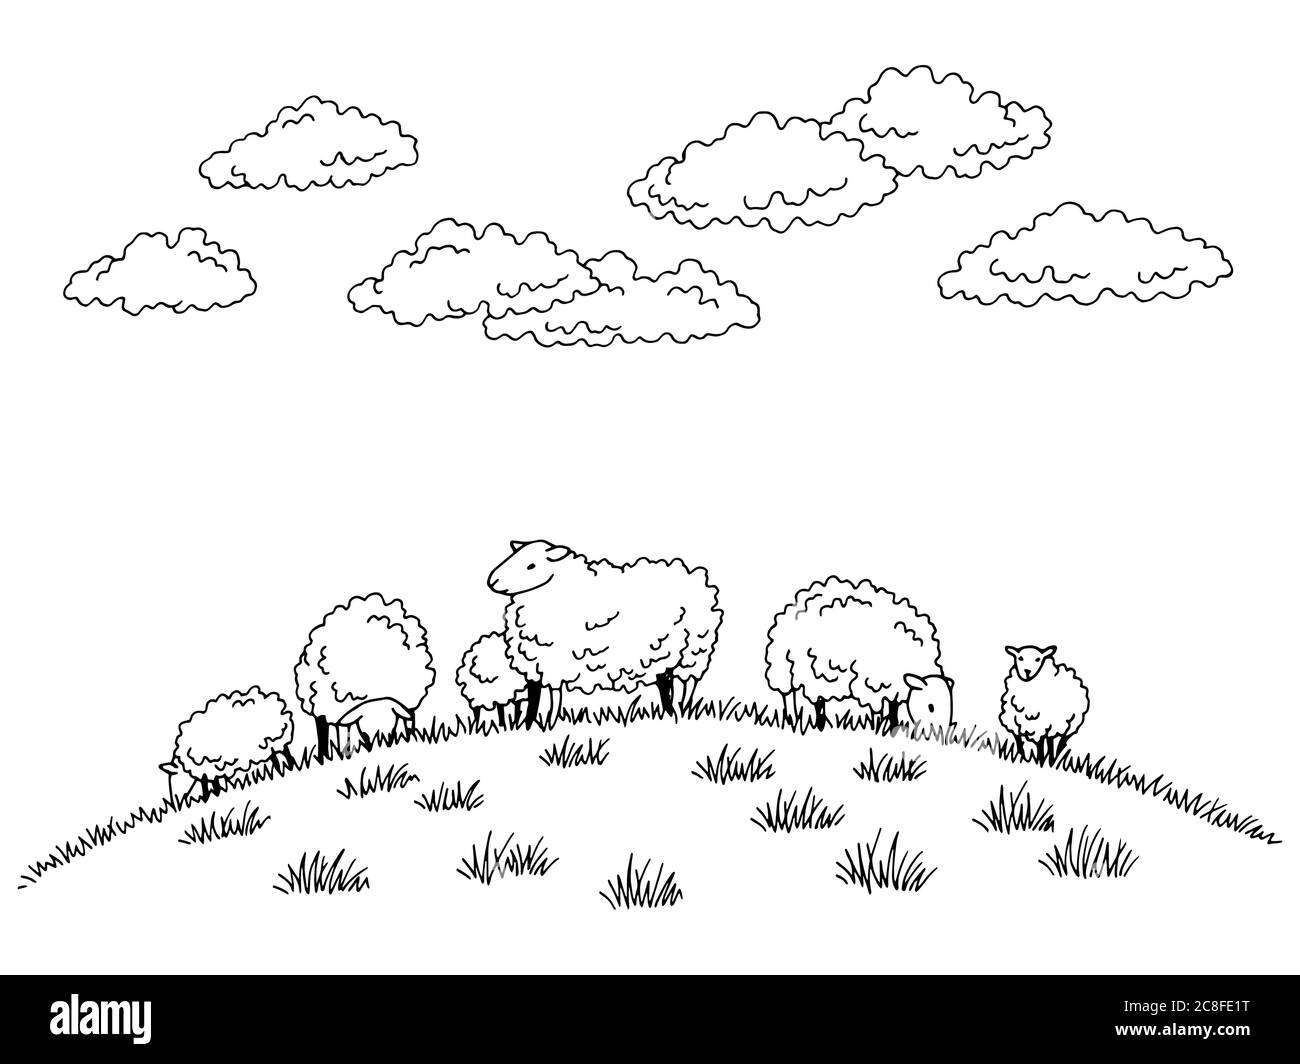 Sheep feeding grass on the hill graphic black white sketch illustration vector Stock Vector